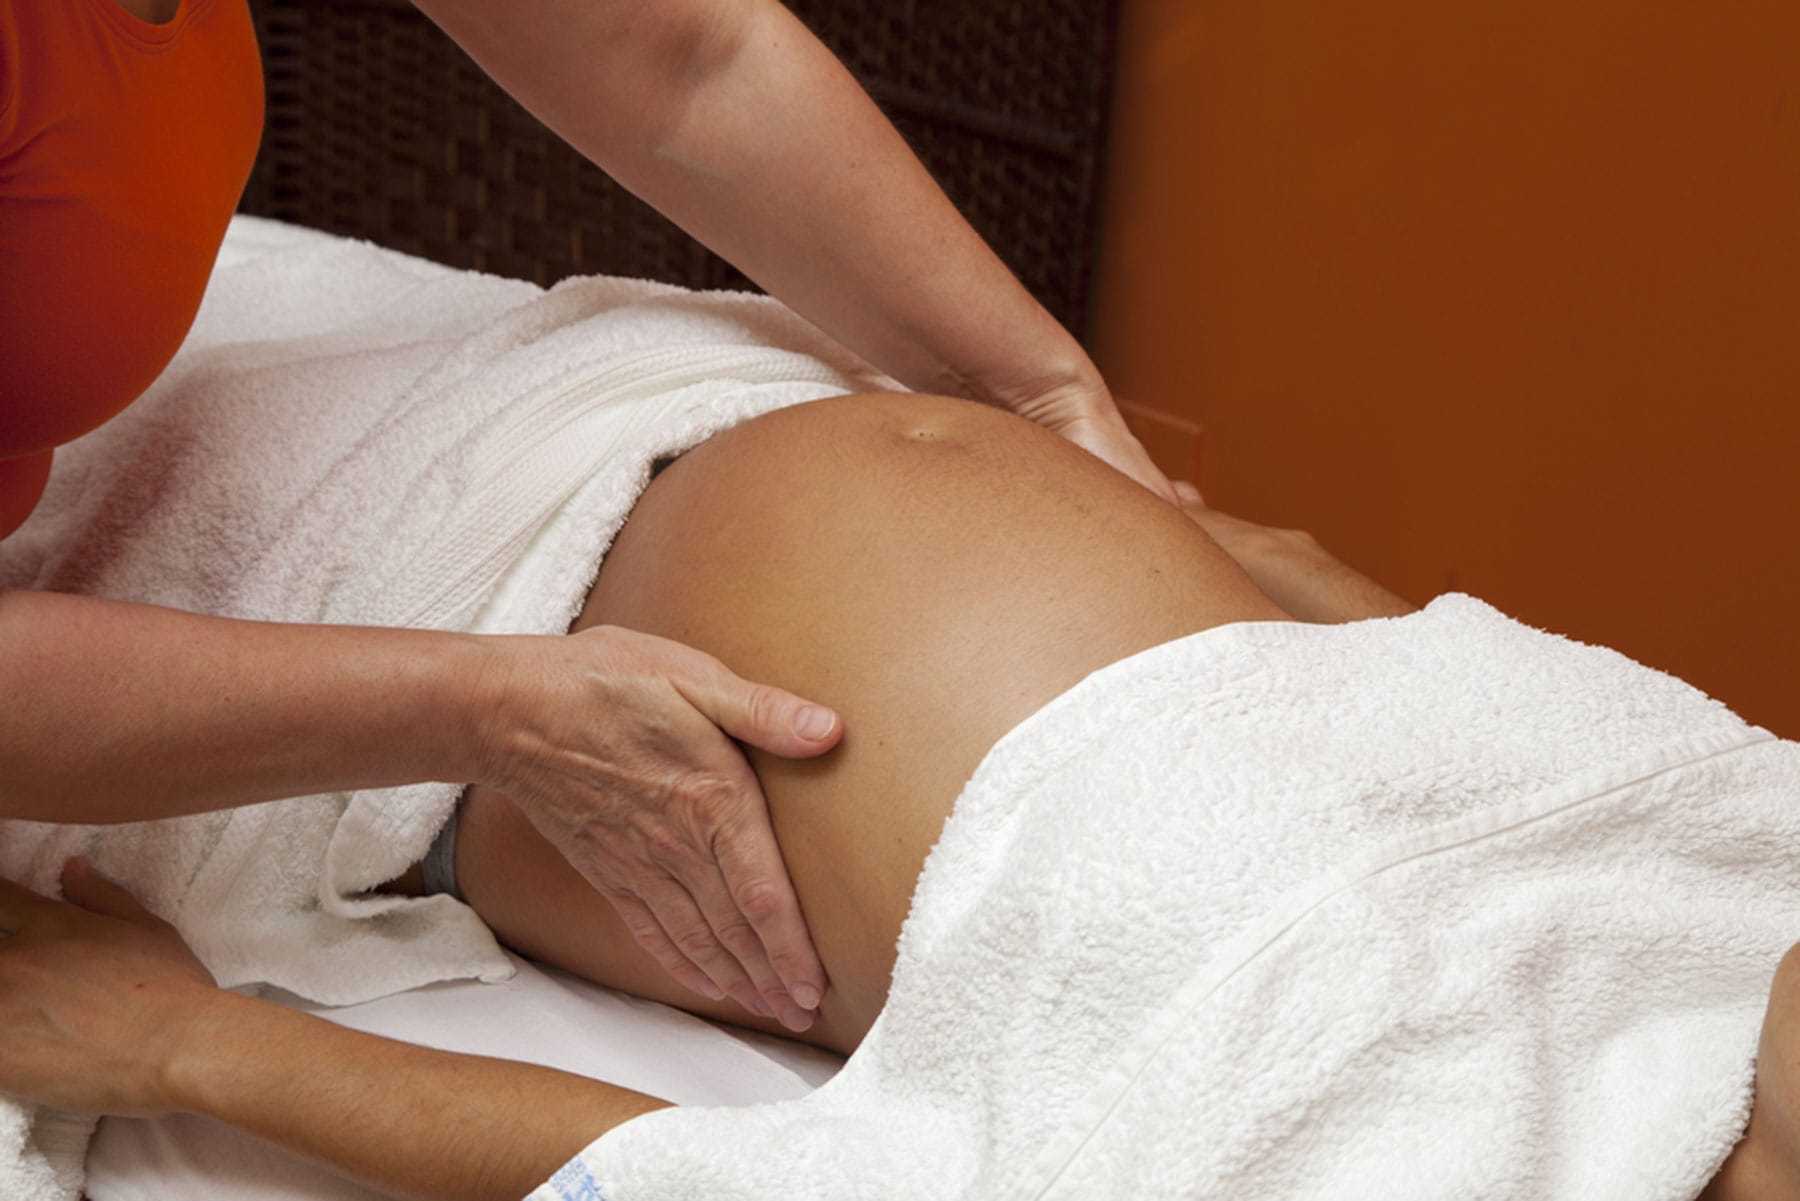 Person receiving a massage while covered with white towels a therapists hands are seen massaging their thigh